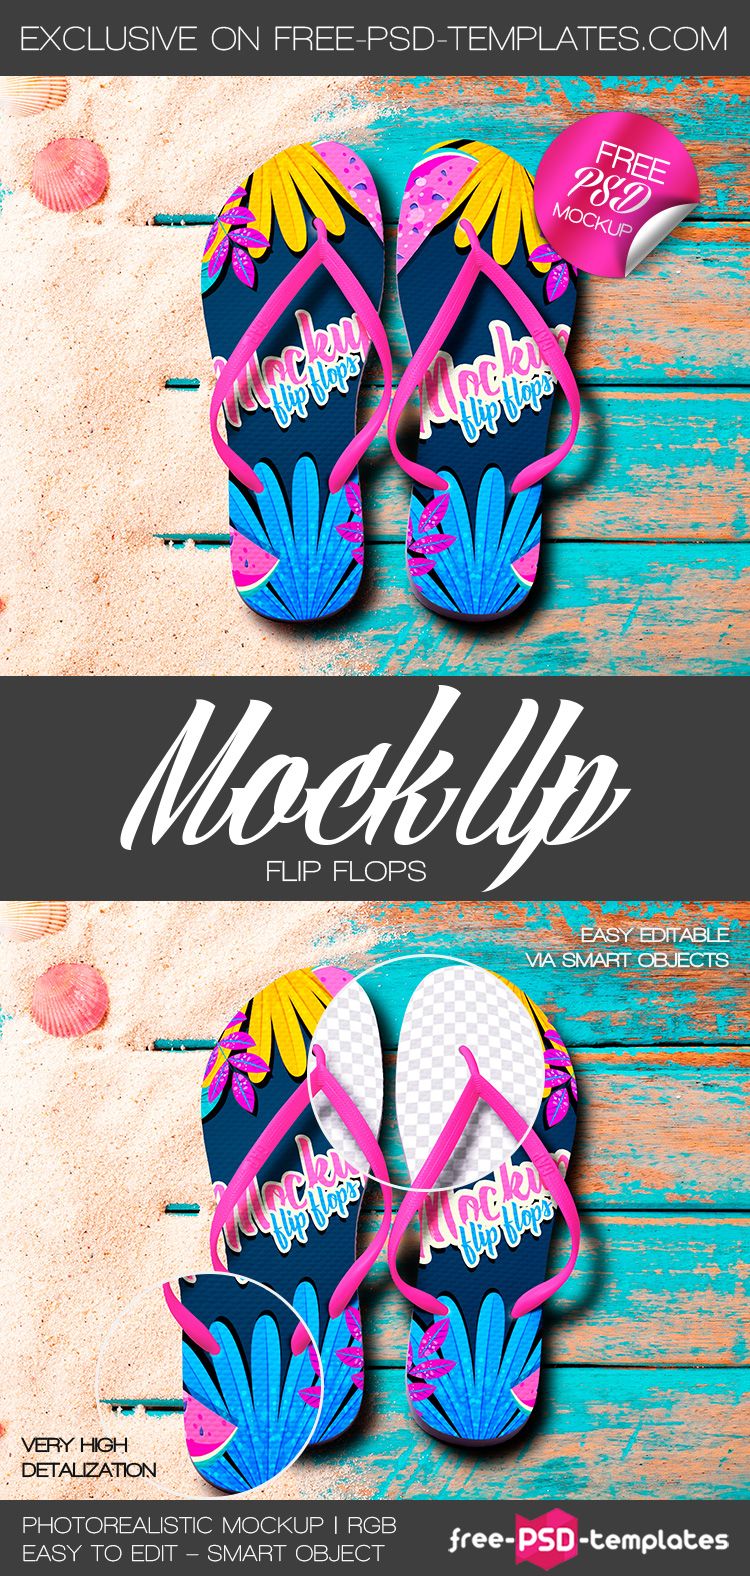 Download Free Flip Flops Mock Up In Psd Free Psd Templates